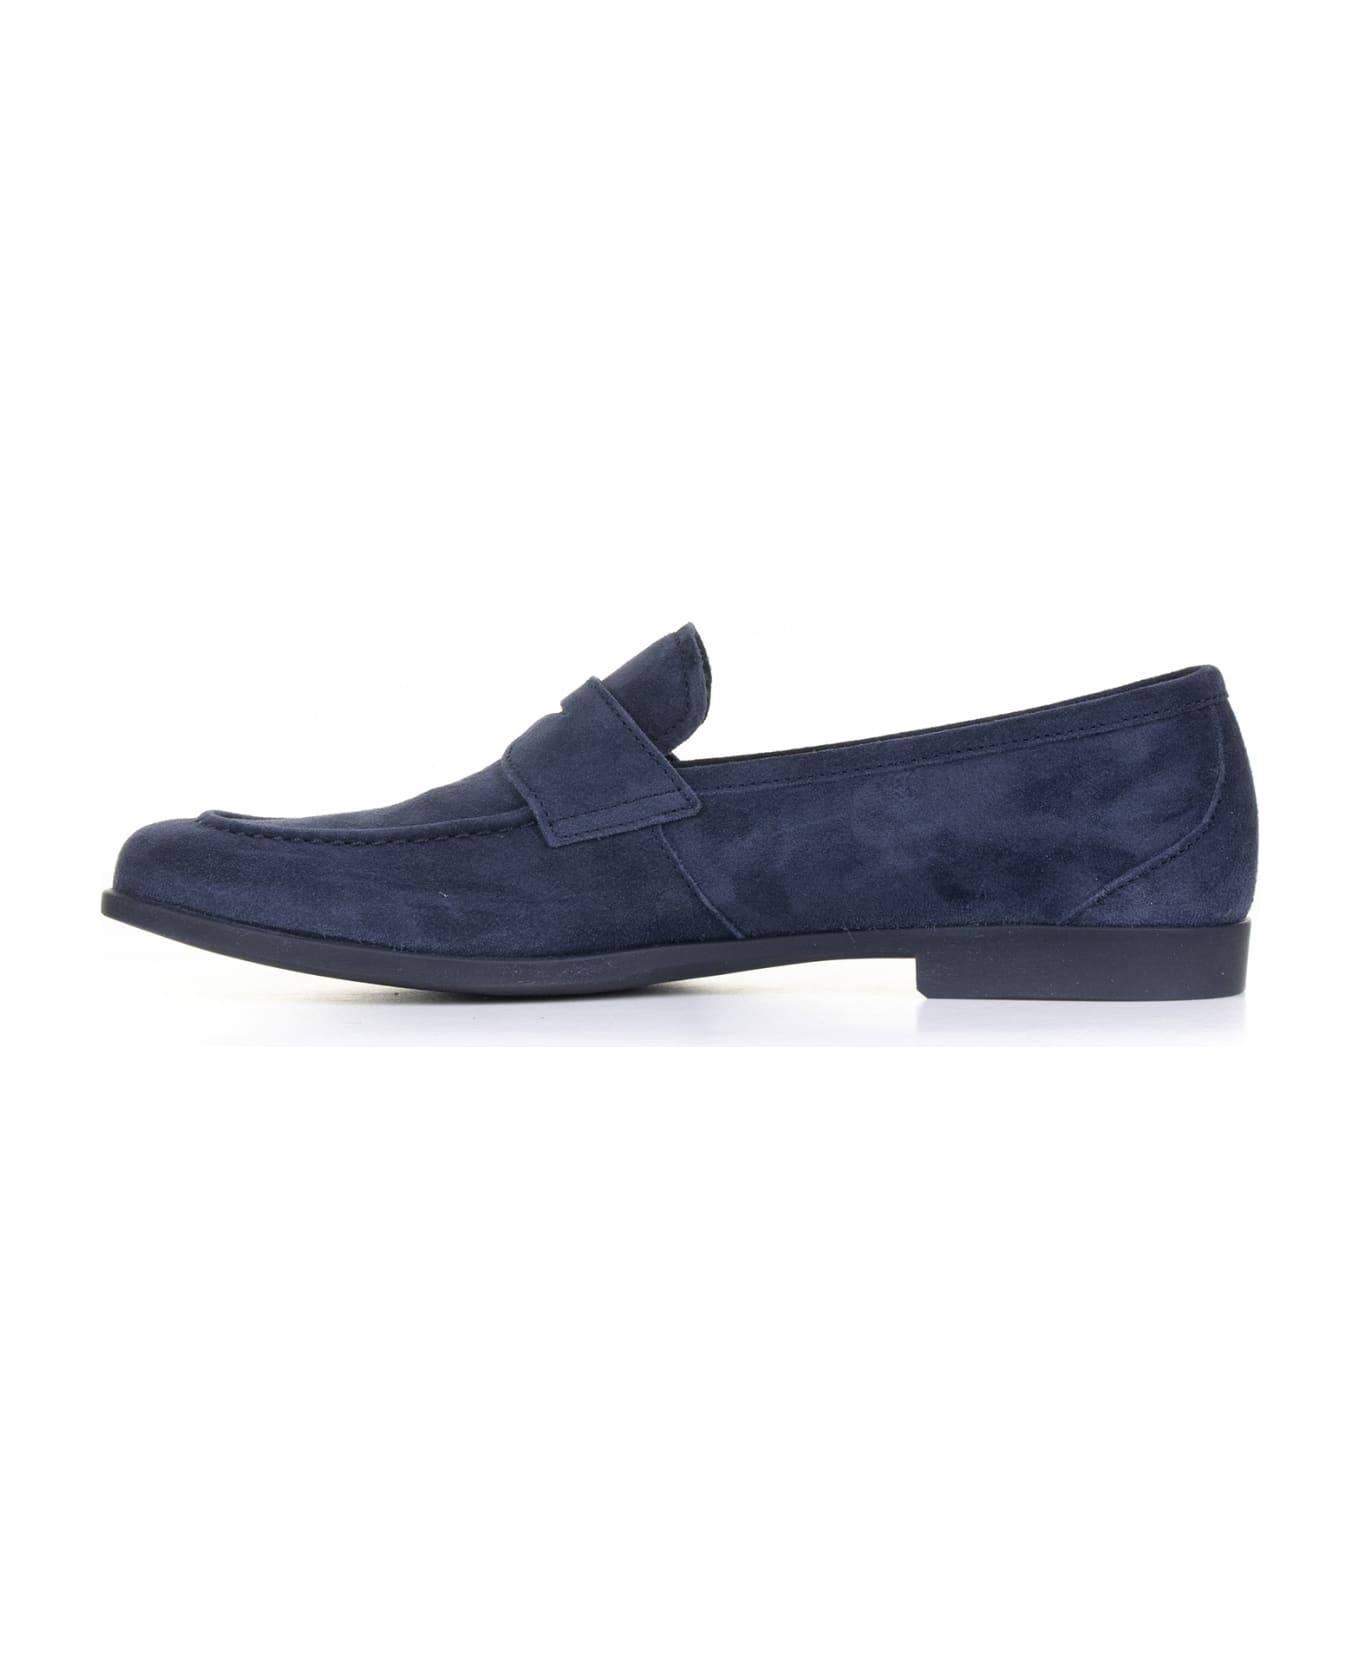 Fratelli Rossetti One Blue Suede Loafer - NAVY